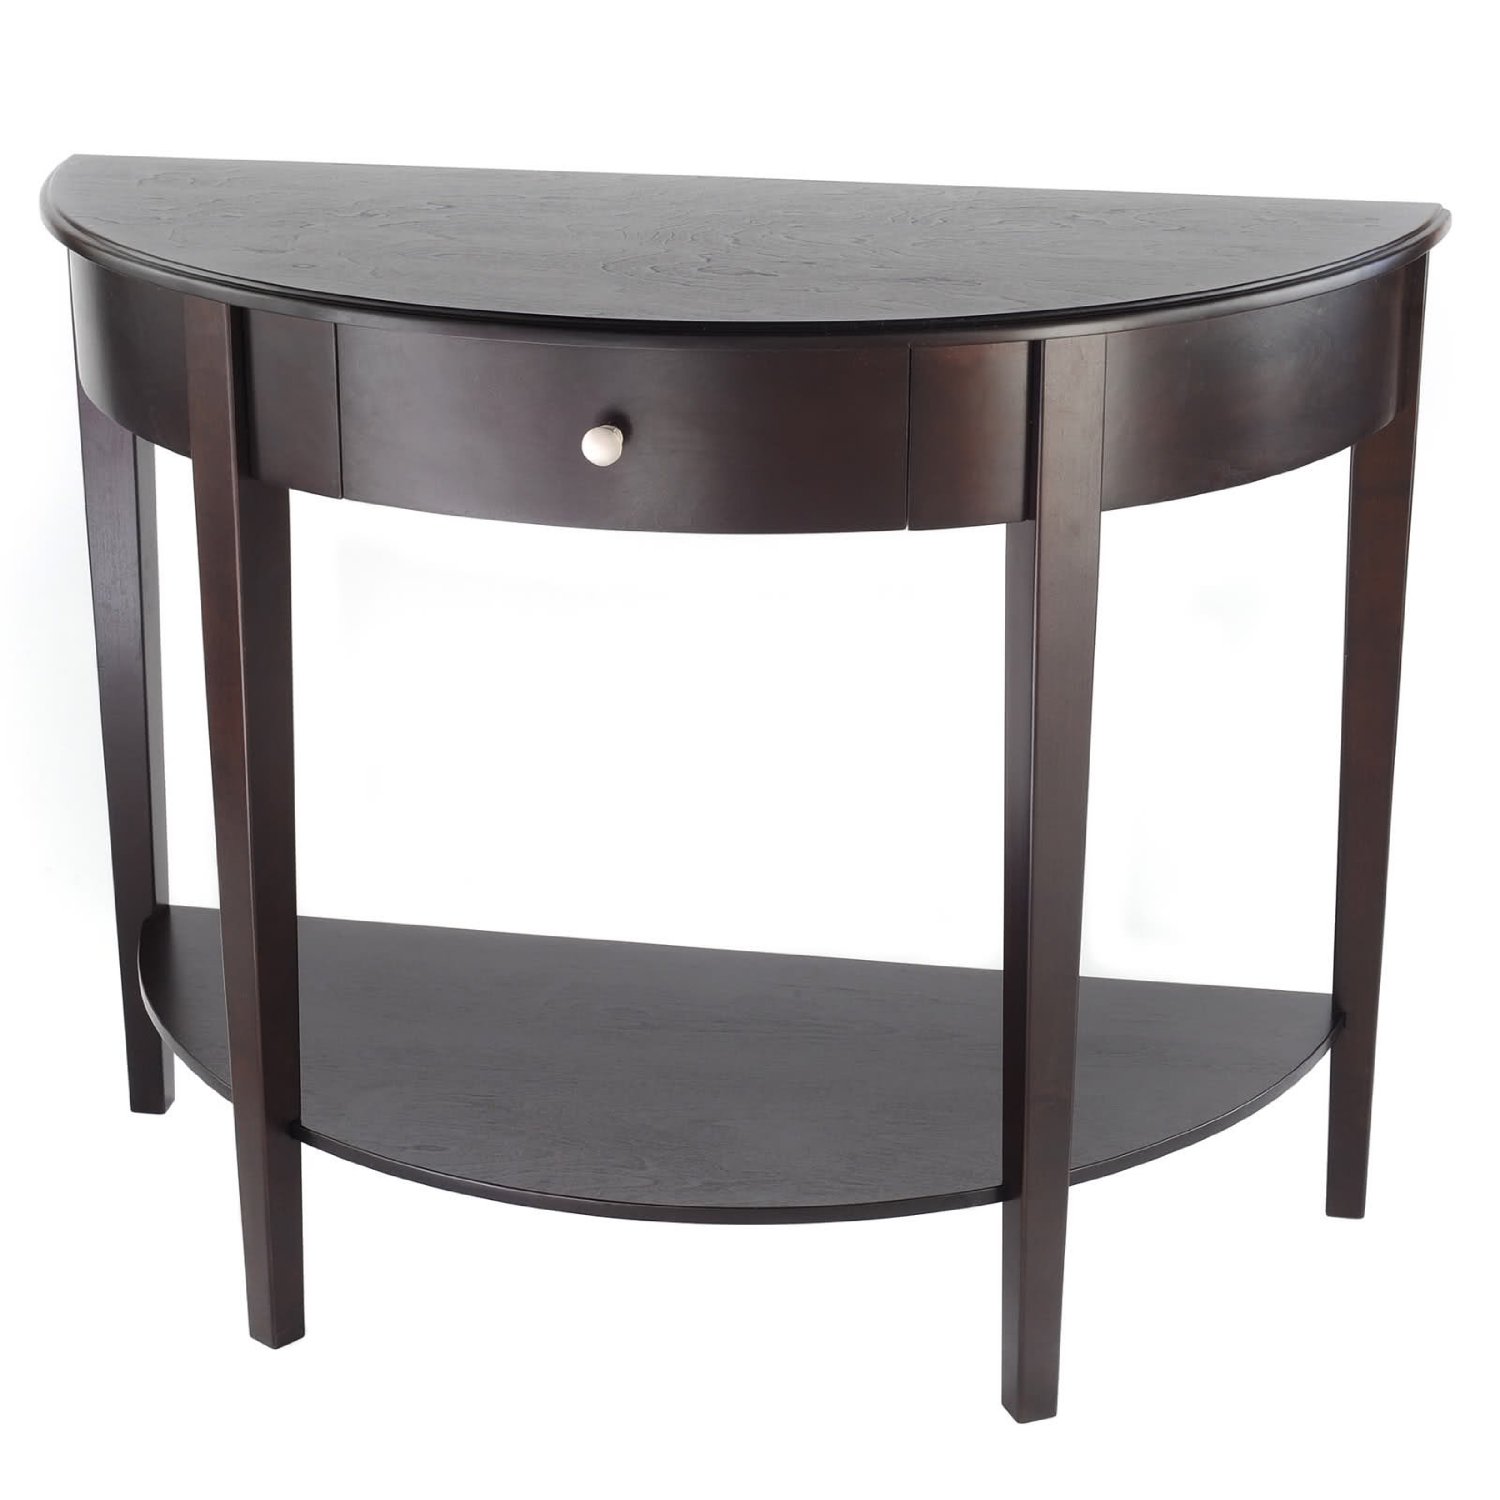 appealing small grey round end table tables plans woodw wood target metal whitewashed base tablecloths home exciting wooden top frenchi white woodworking pedestal off marble black